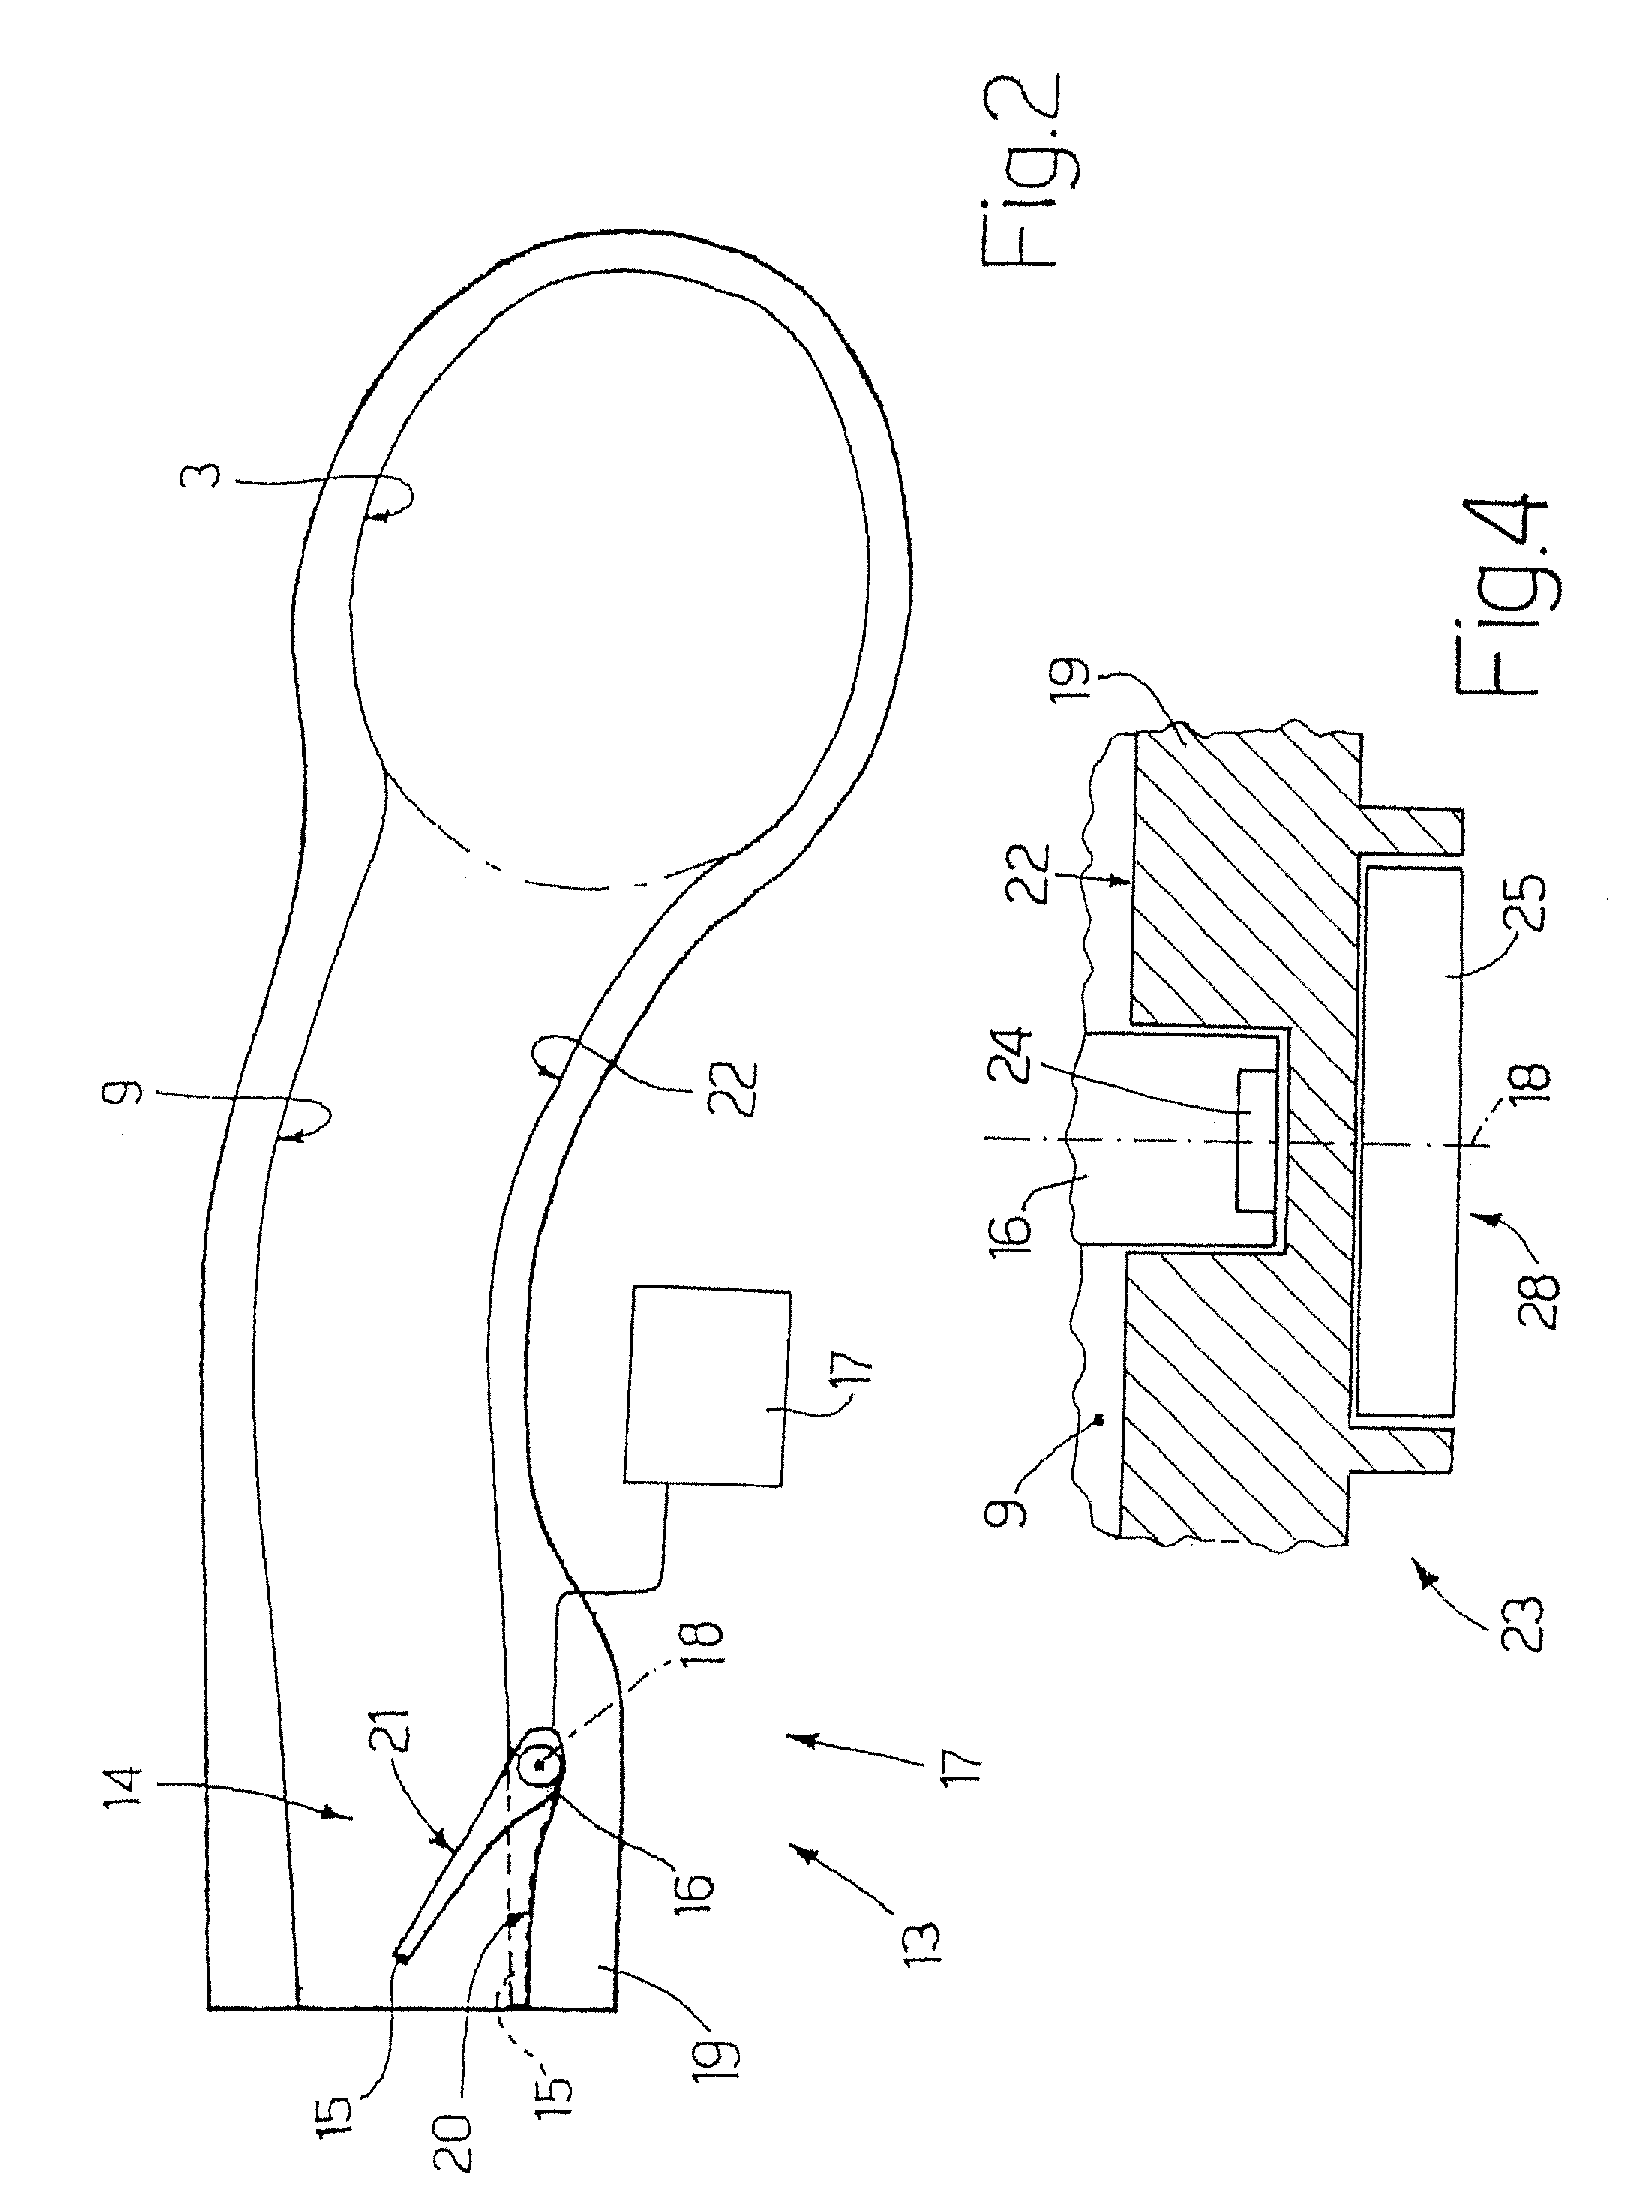 Variable-geometry intake manifold for an internal-combustion engine